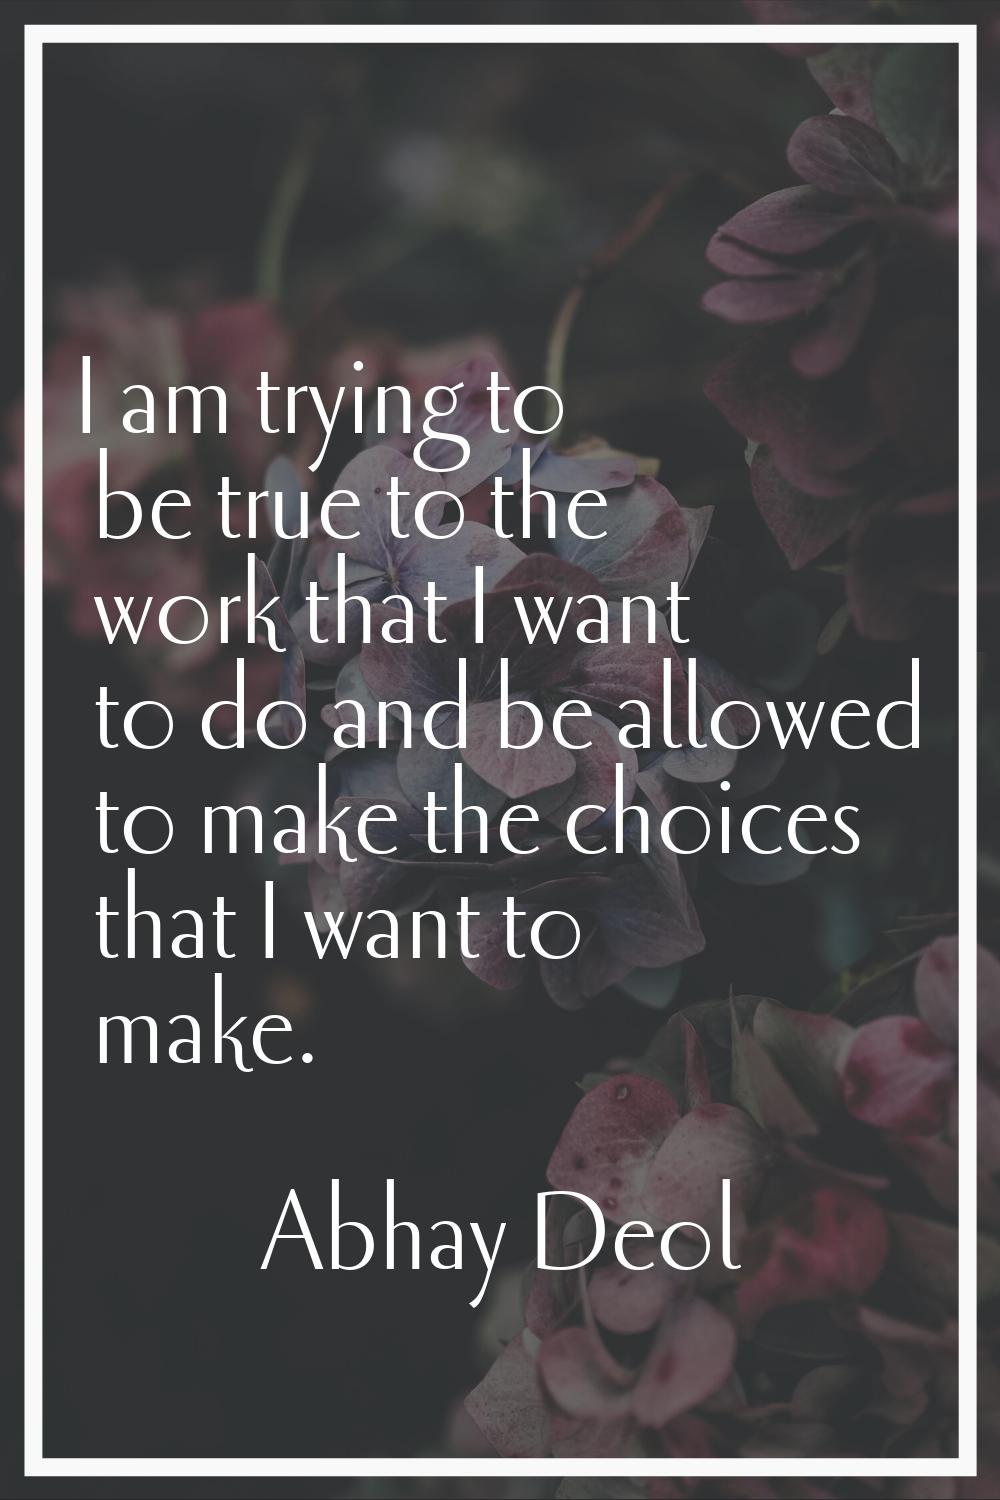 I am trying to be true to the work that I want to do and be allowed to make the choices that I want